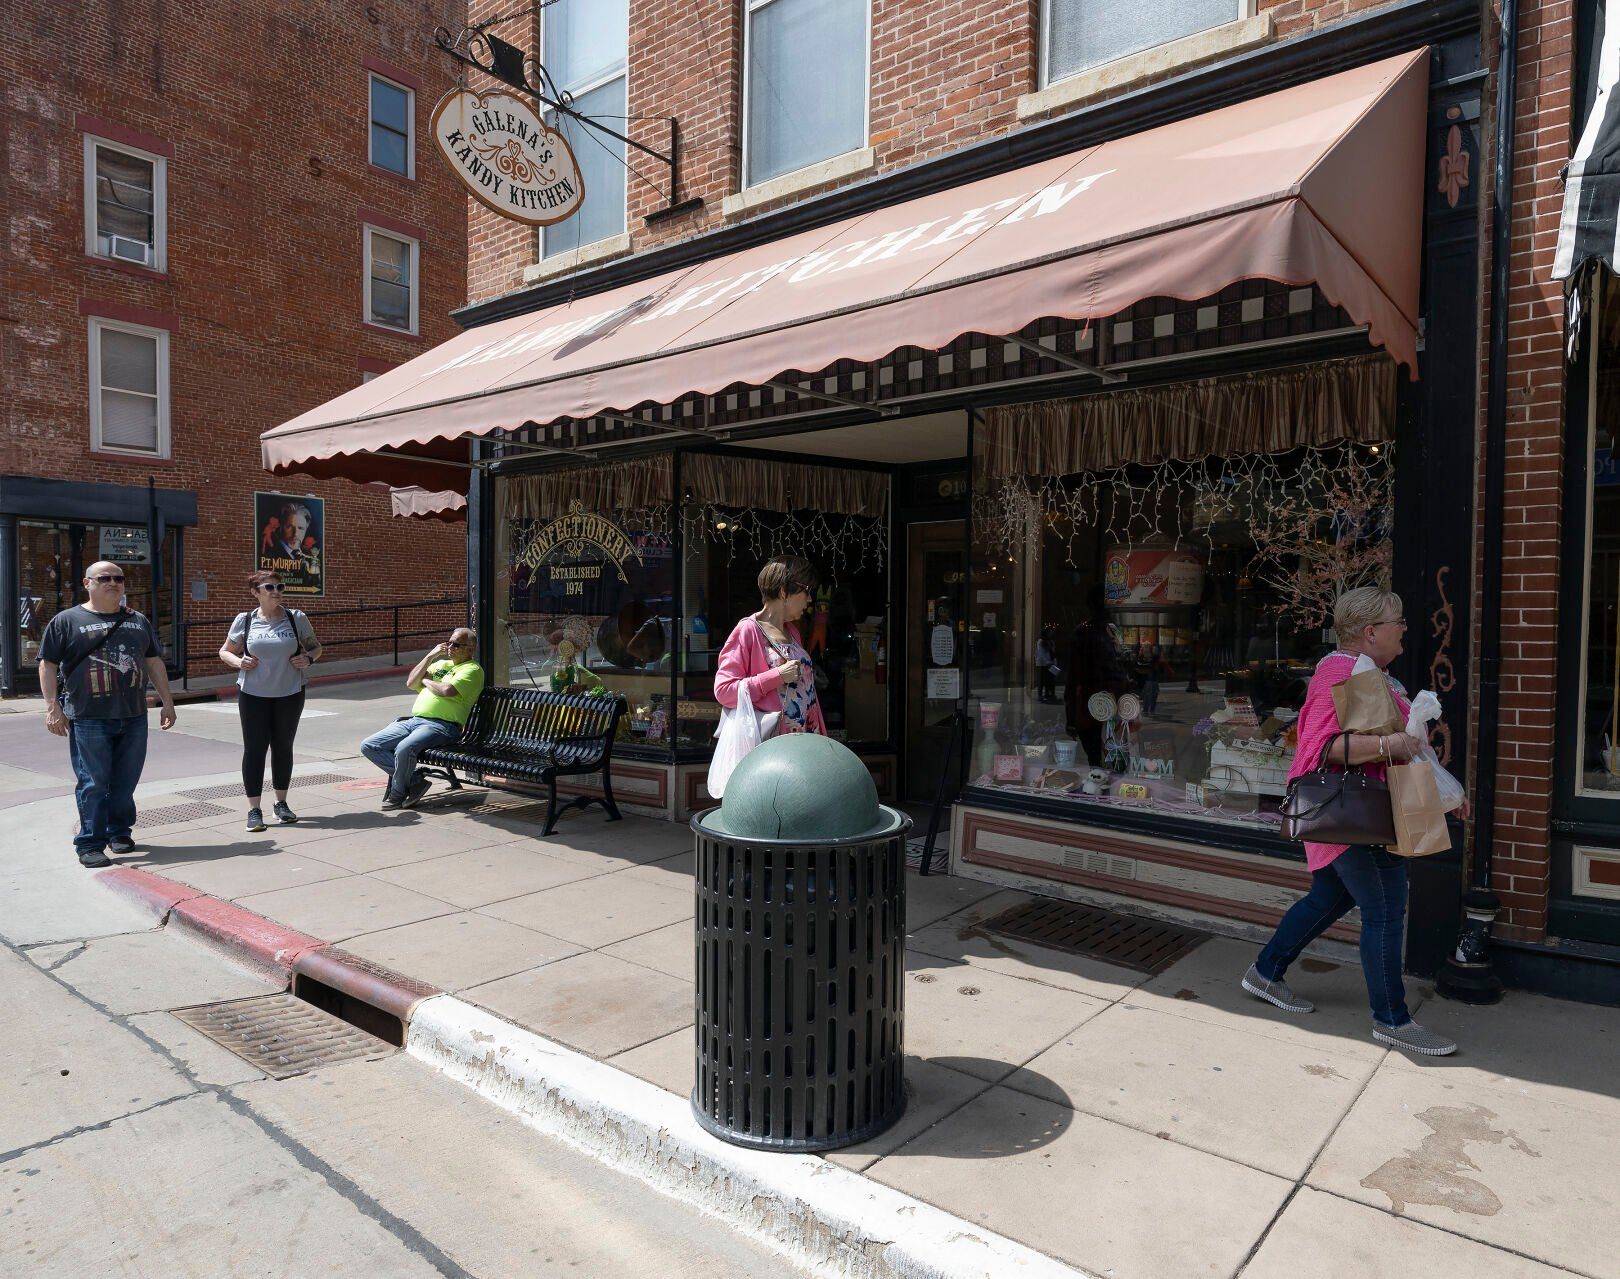 Galena’s Kandy Kitchen is located at 100 N. Main St. in Galena.    PHOTO CREDIT: Stephen Gassman